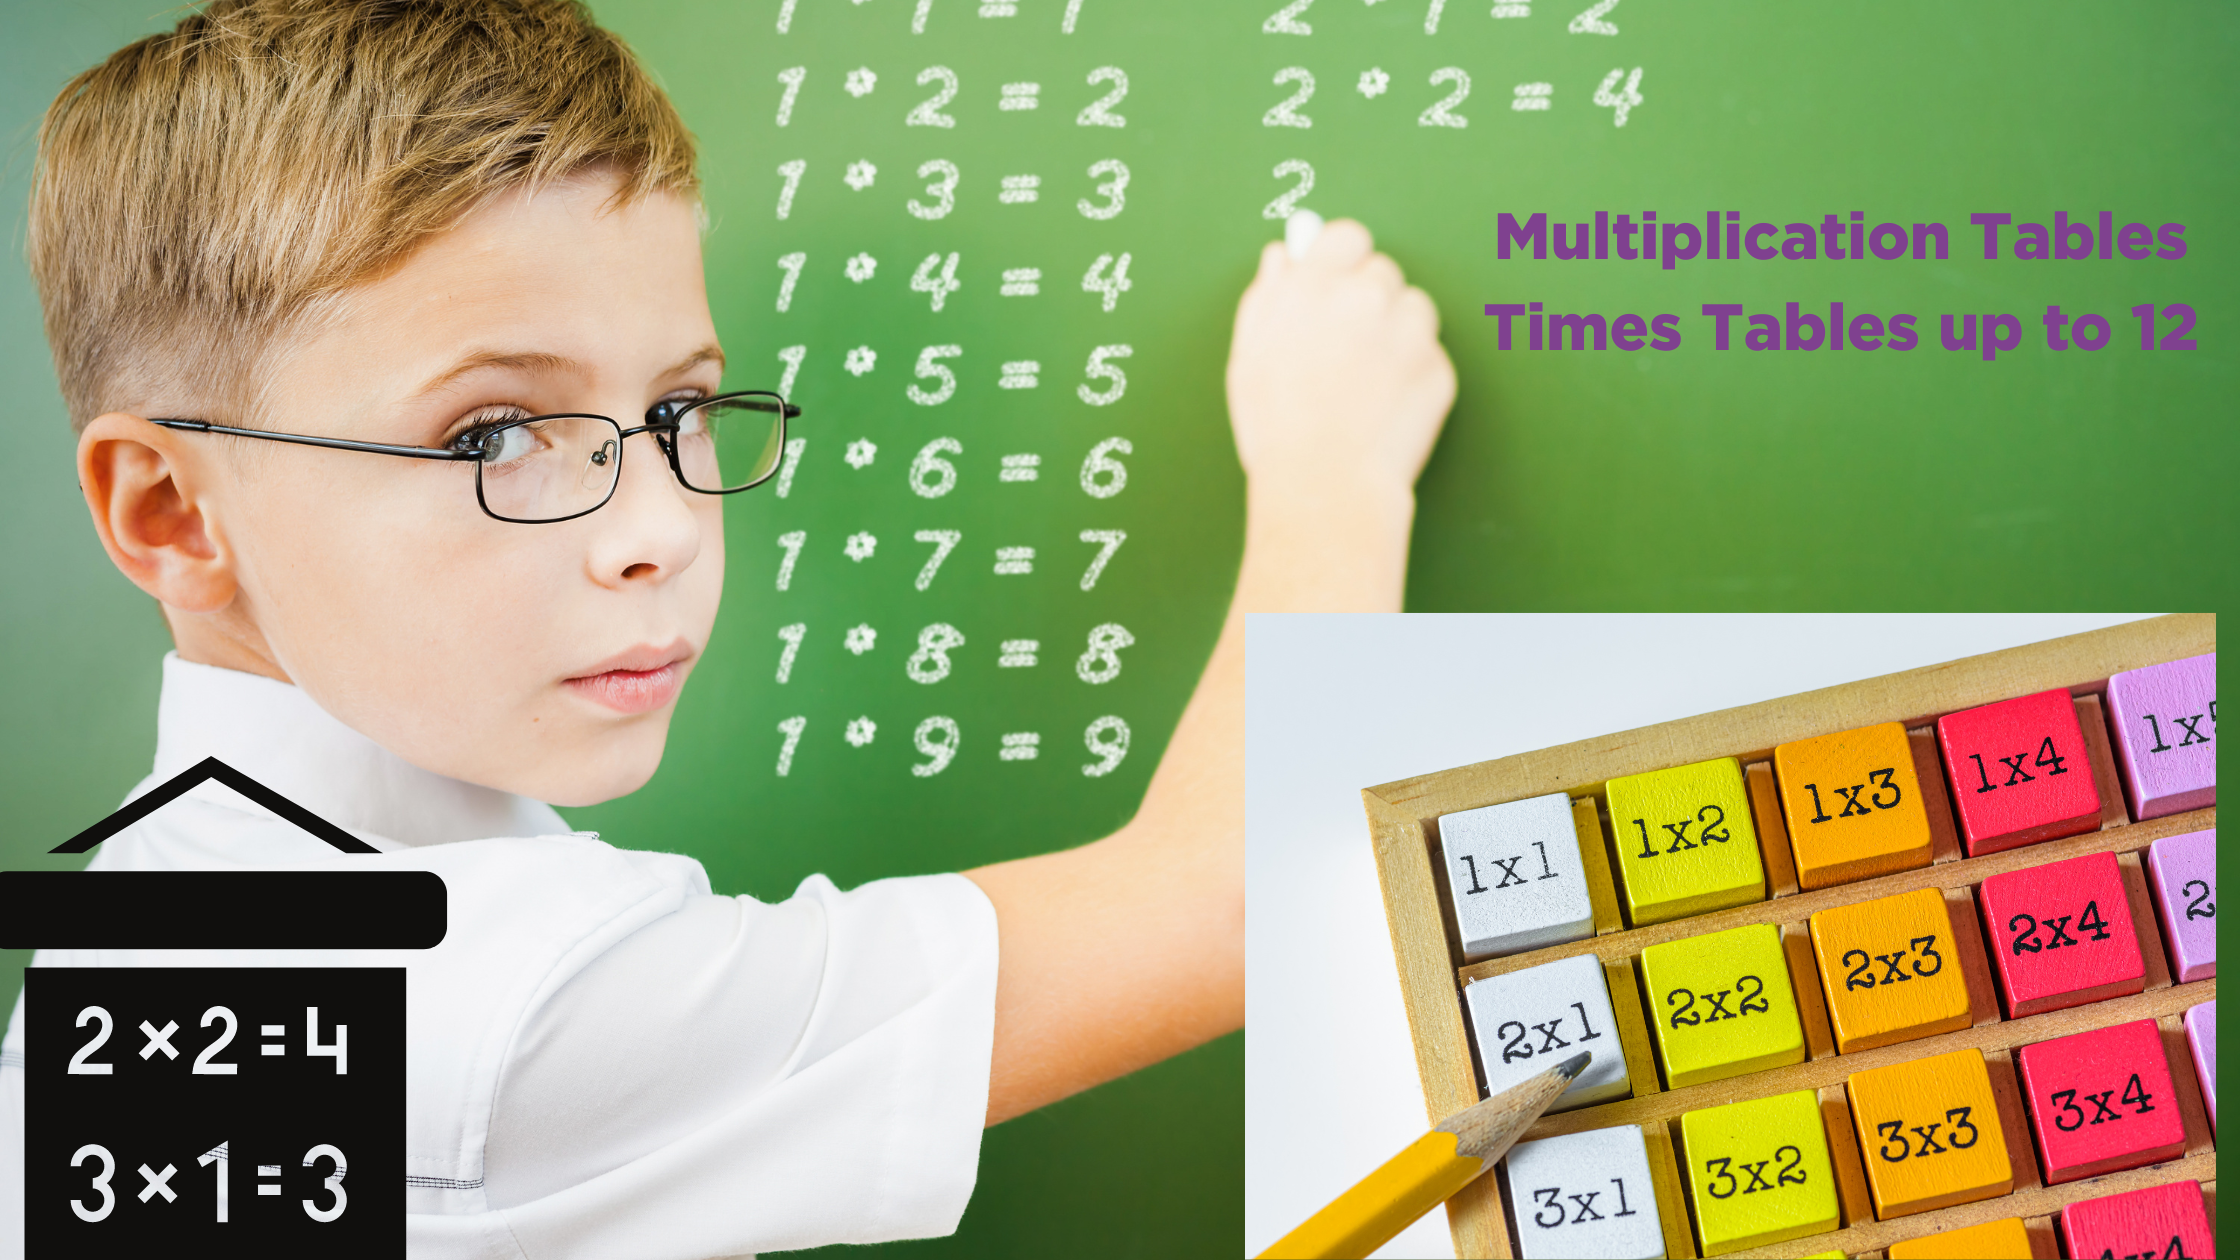 Multiplication Tables ( Times Tables up to 12)